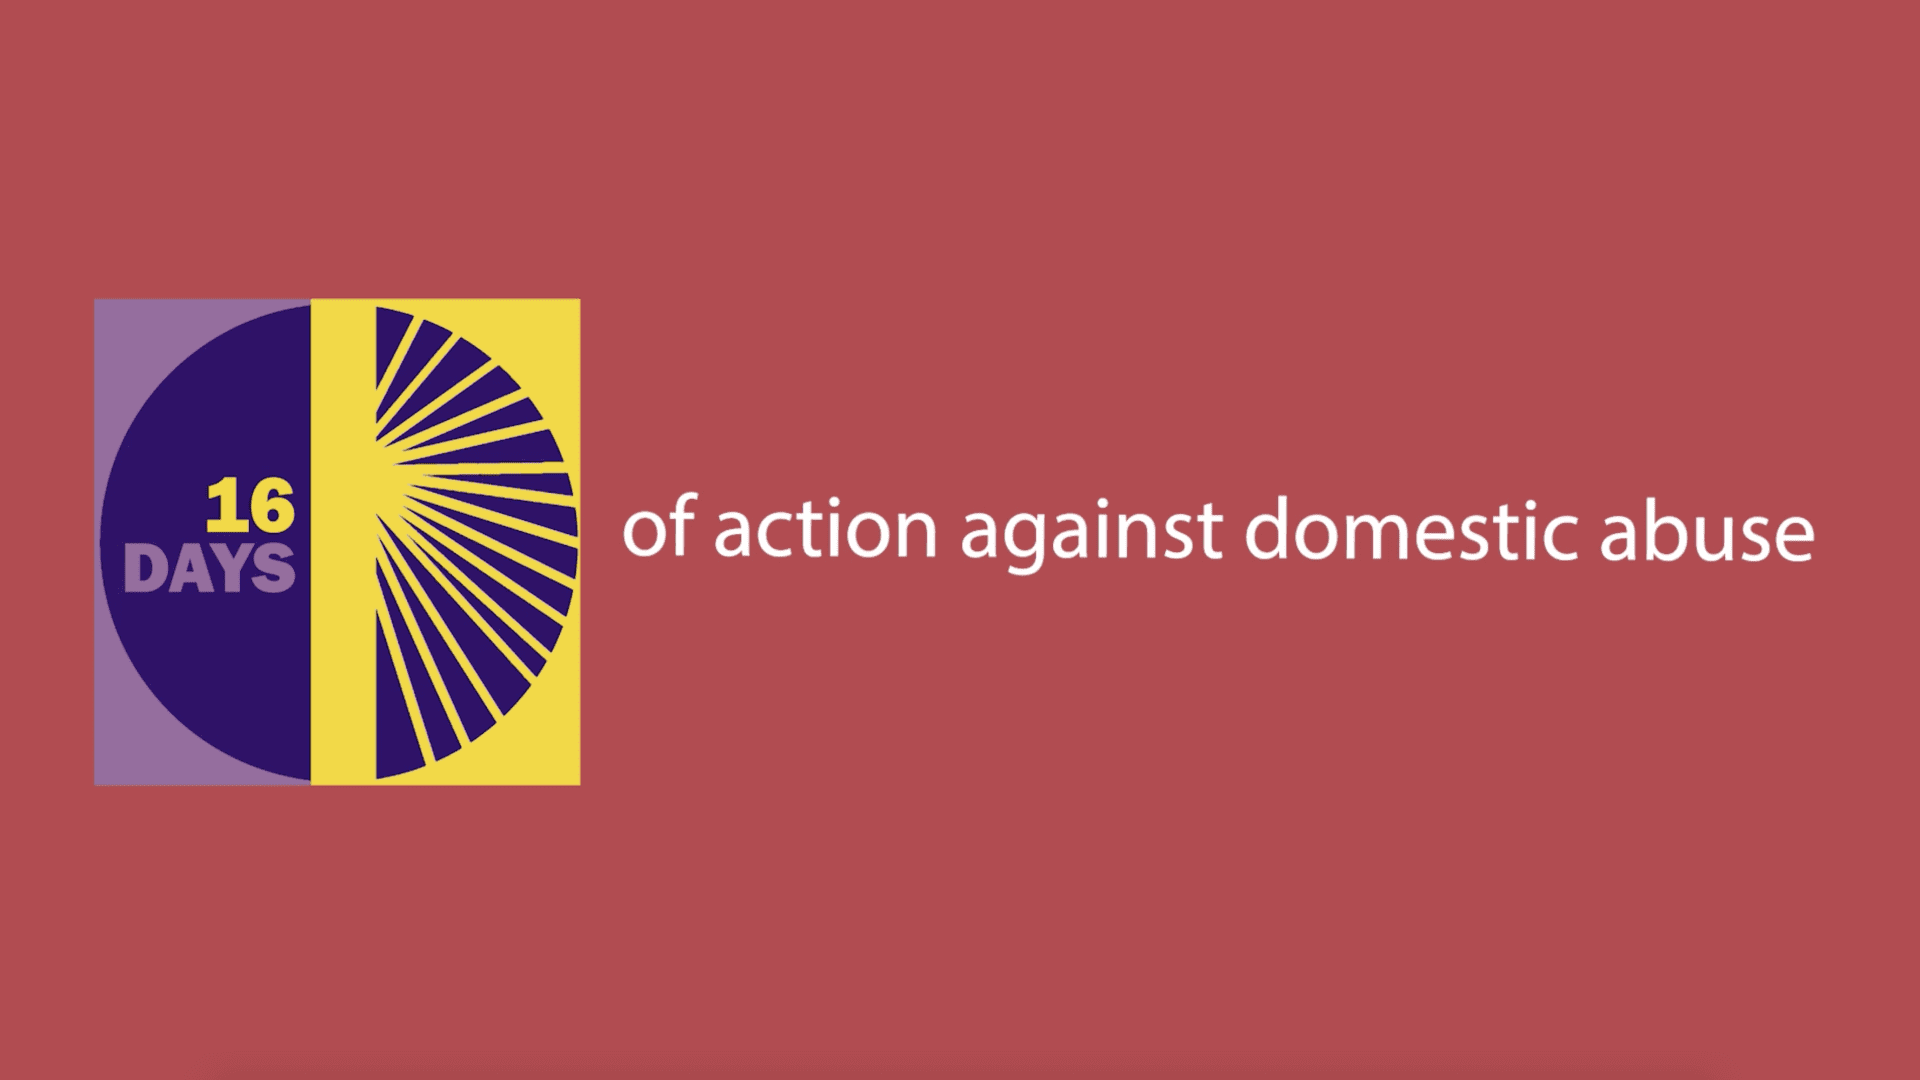 Action against domestic abuse